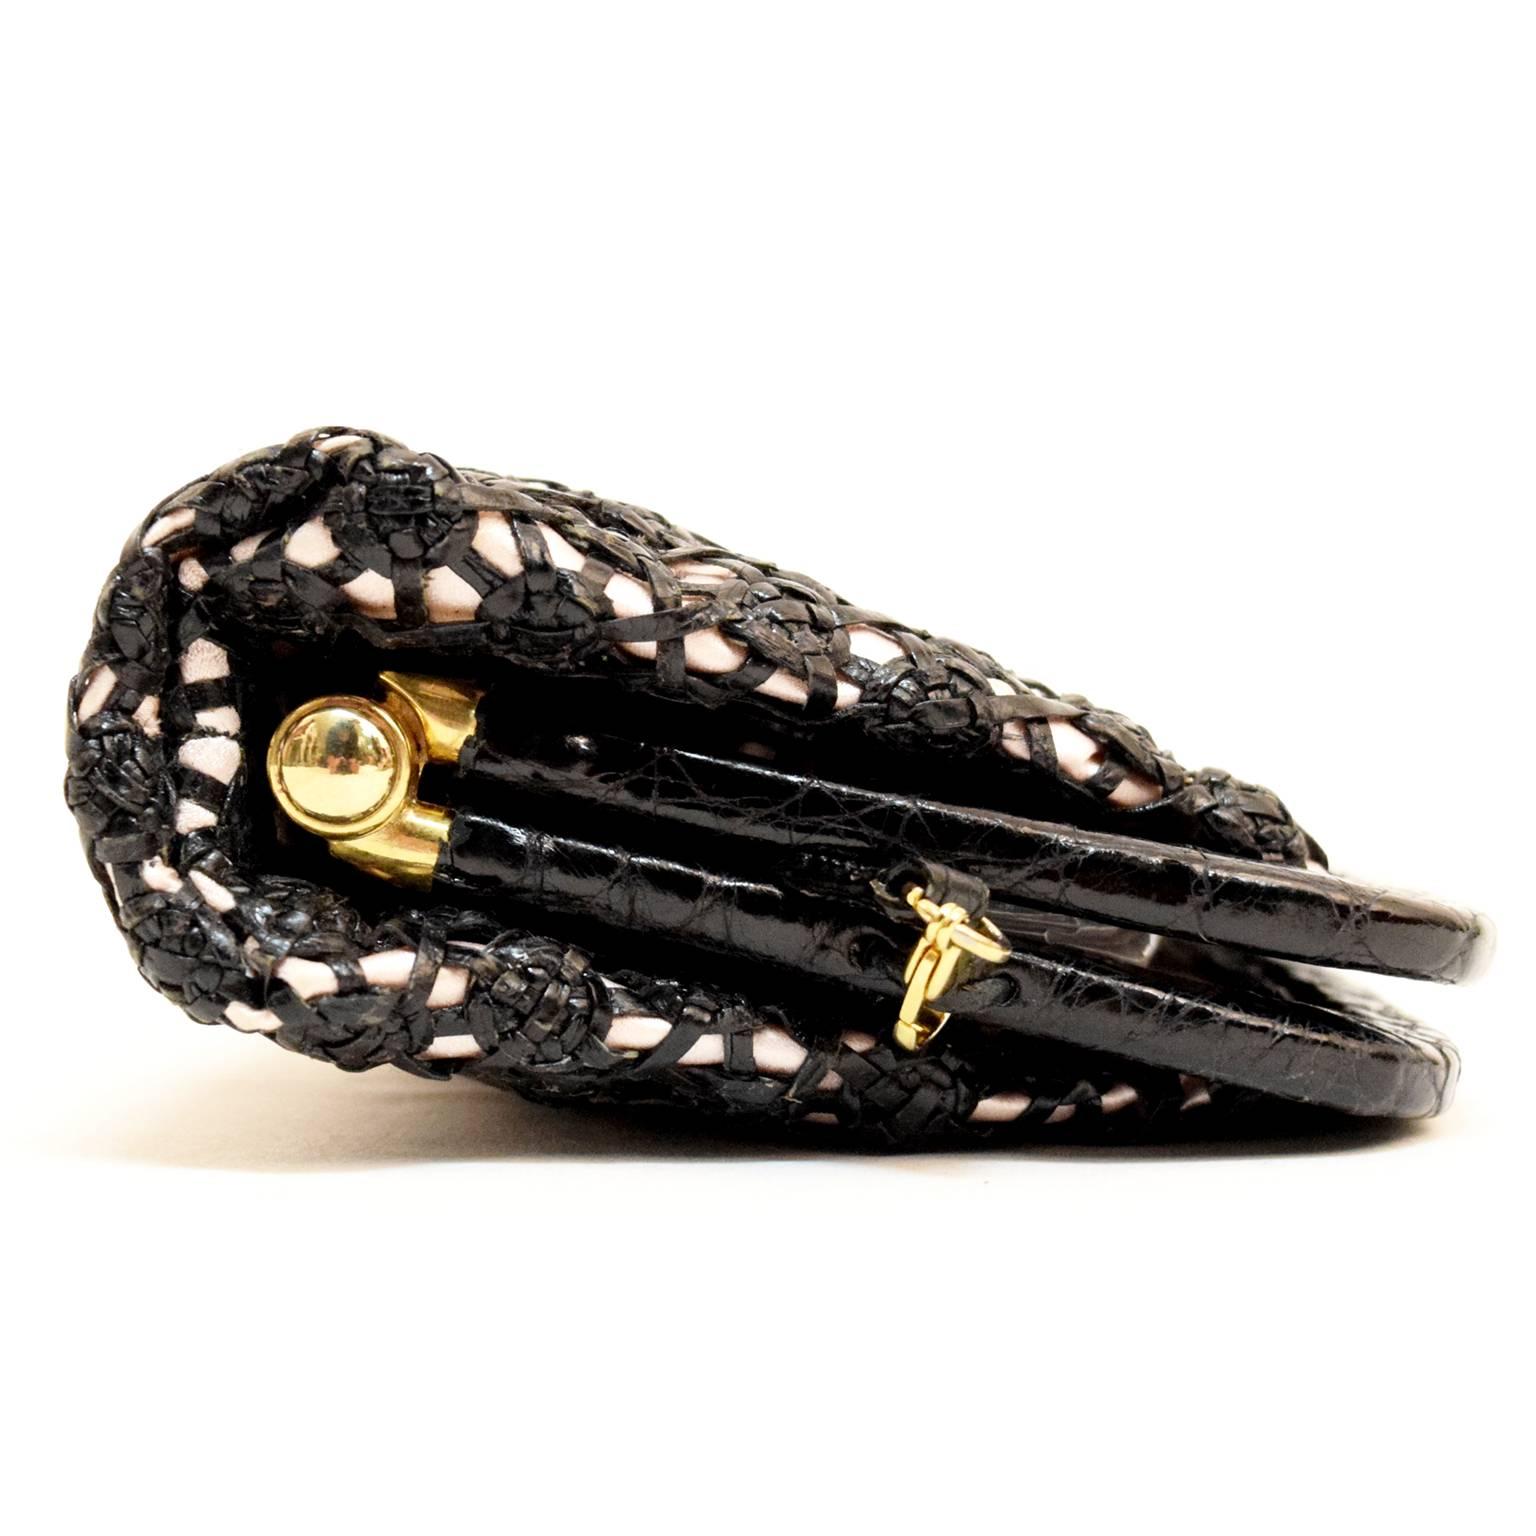 This amazing Nancy Gonzalez Clutch can be also converted into a cross body with a removable leather strap. Black Croc is woven into an intricate design formed into little florets with cutout detailing. Lined with 100% pale pink silk and embellished